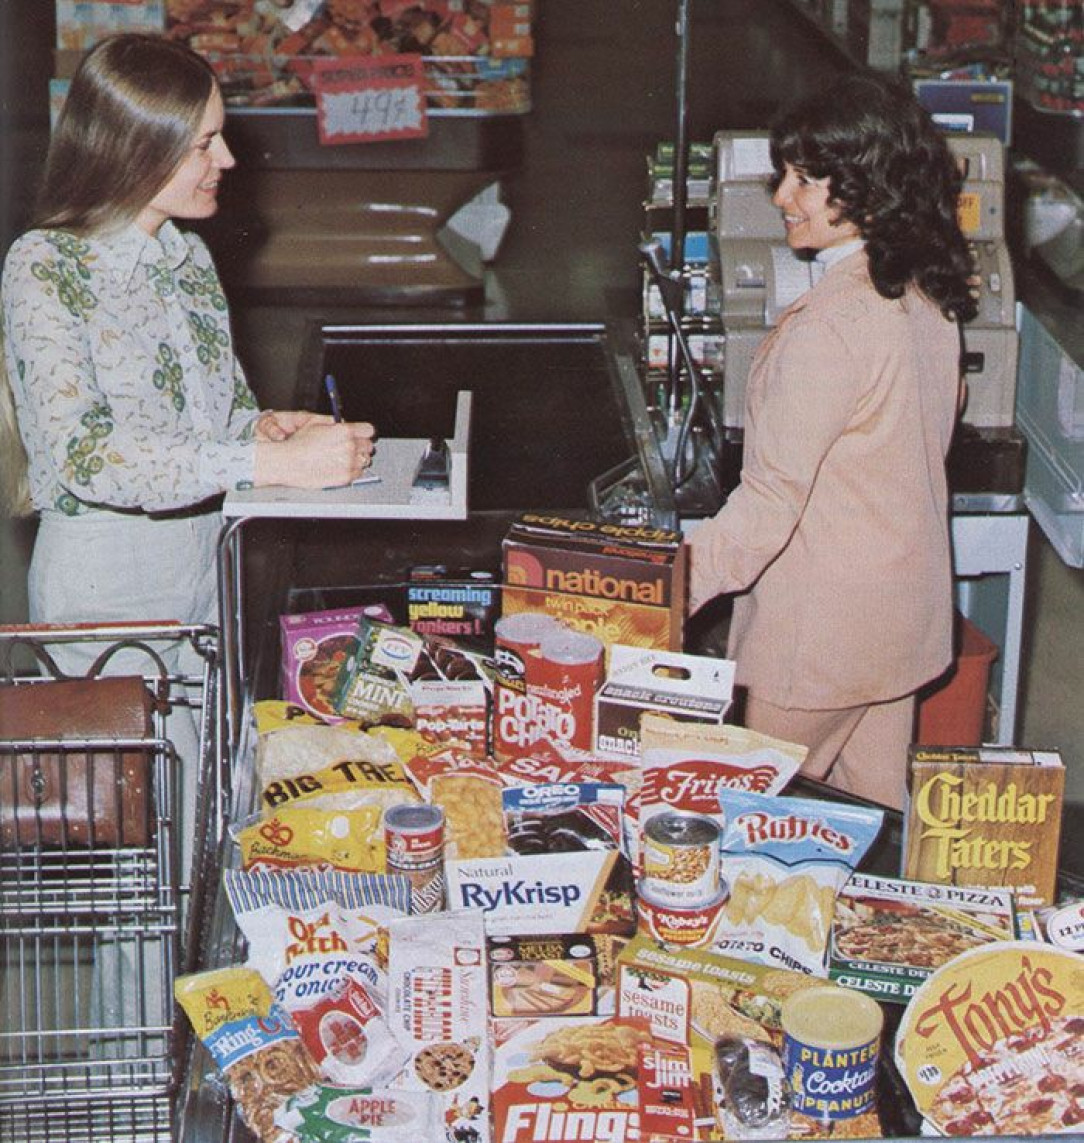 A Customer and a employee at The Supermarket 1960s